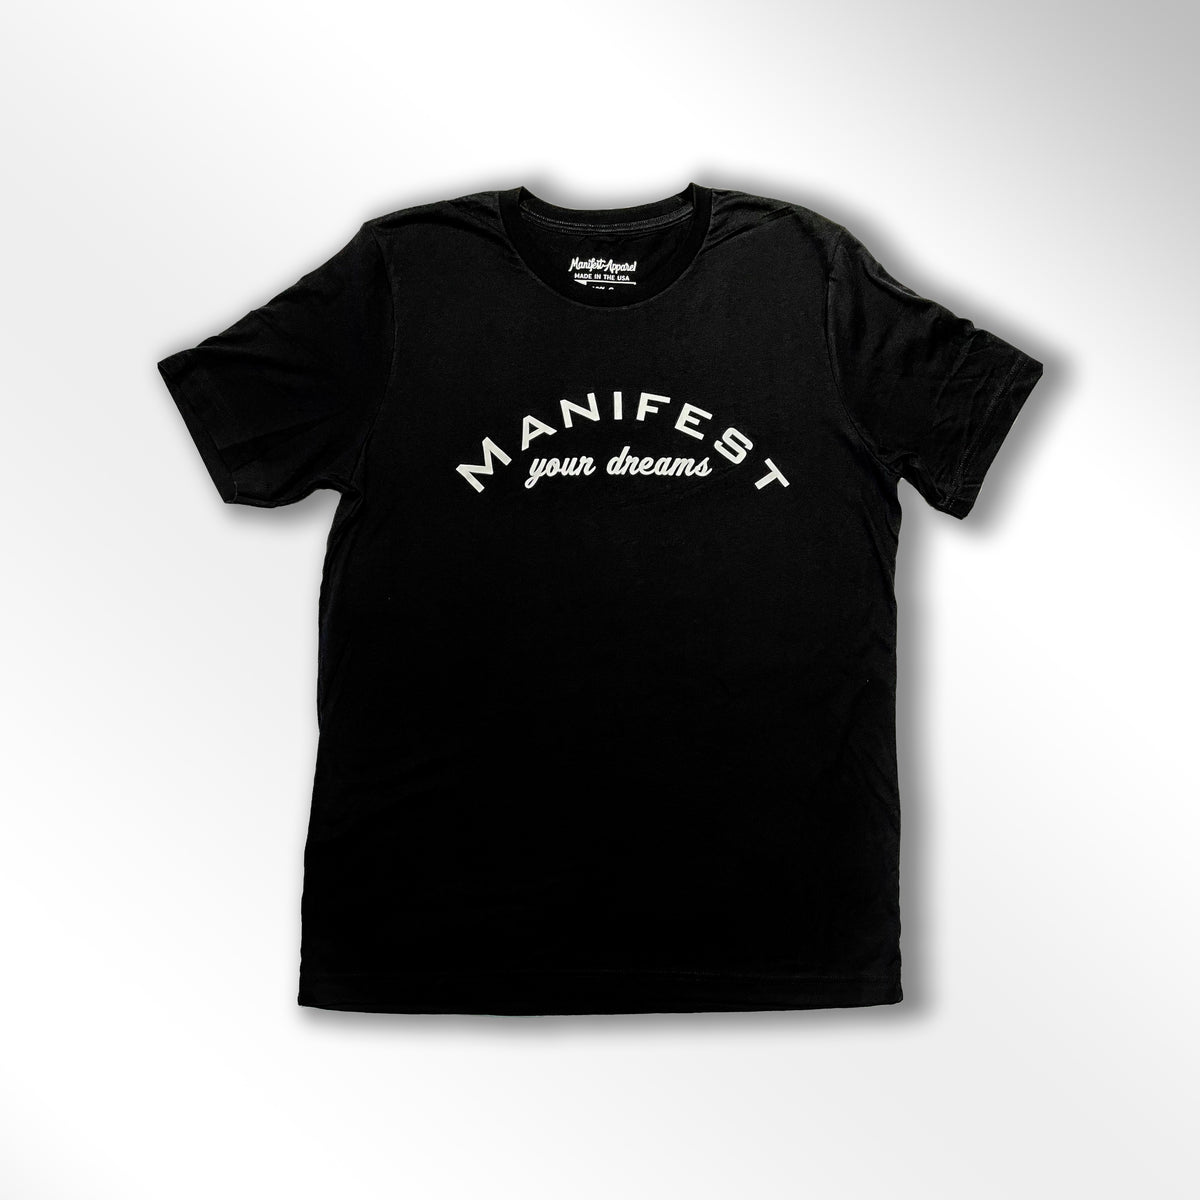 Black and White Manifest Your Dreams Shirt